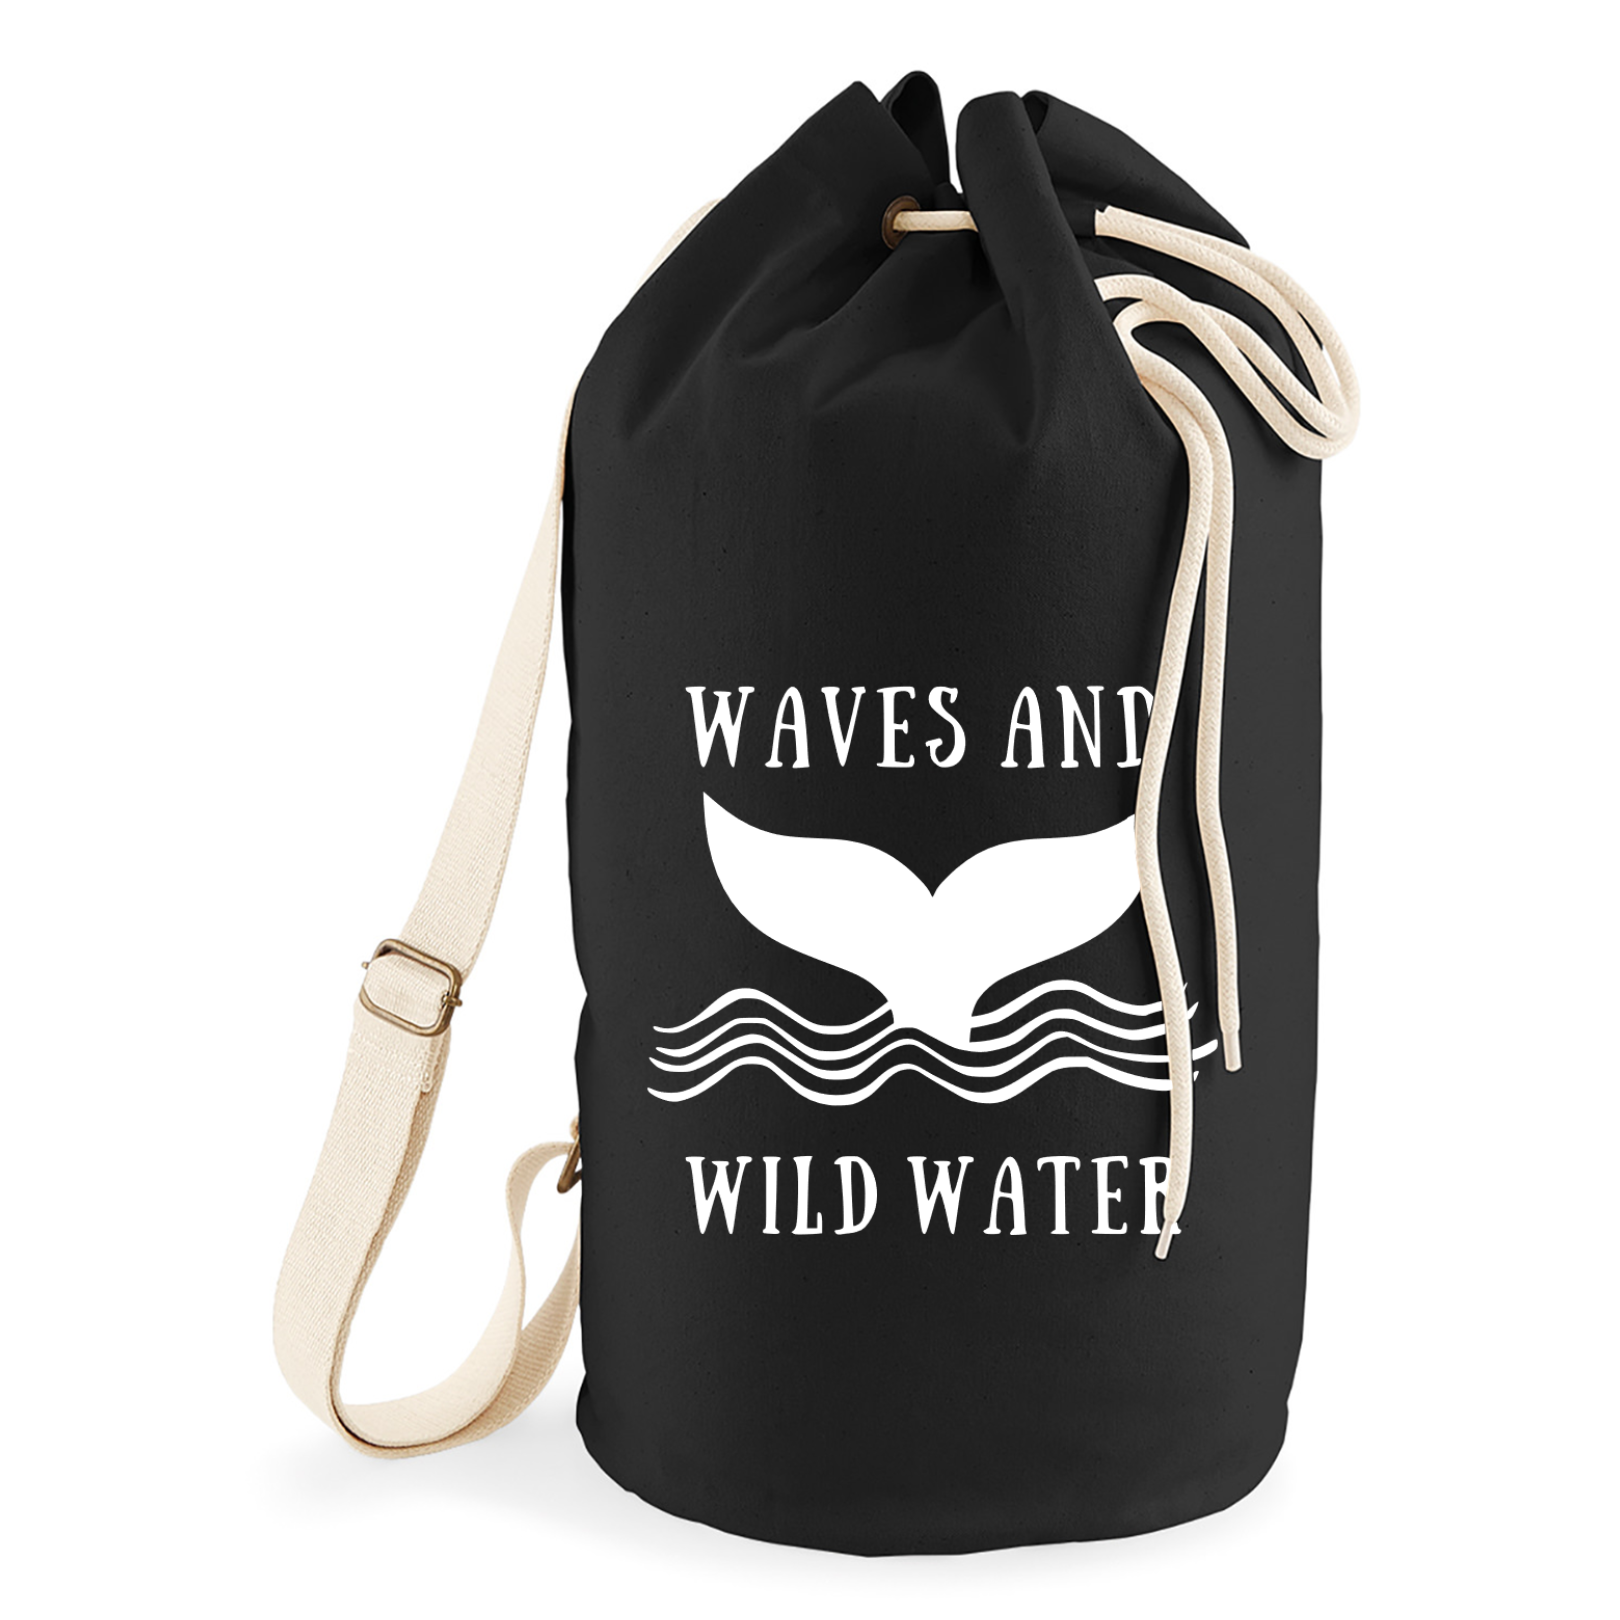 A black sailor bag with a cream rope draw cord and webbing strap. The Waves & Wild Water logo is on the front in white.